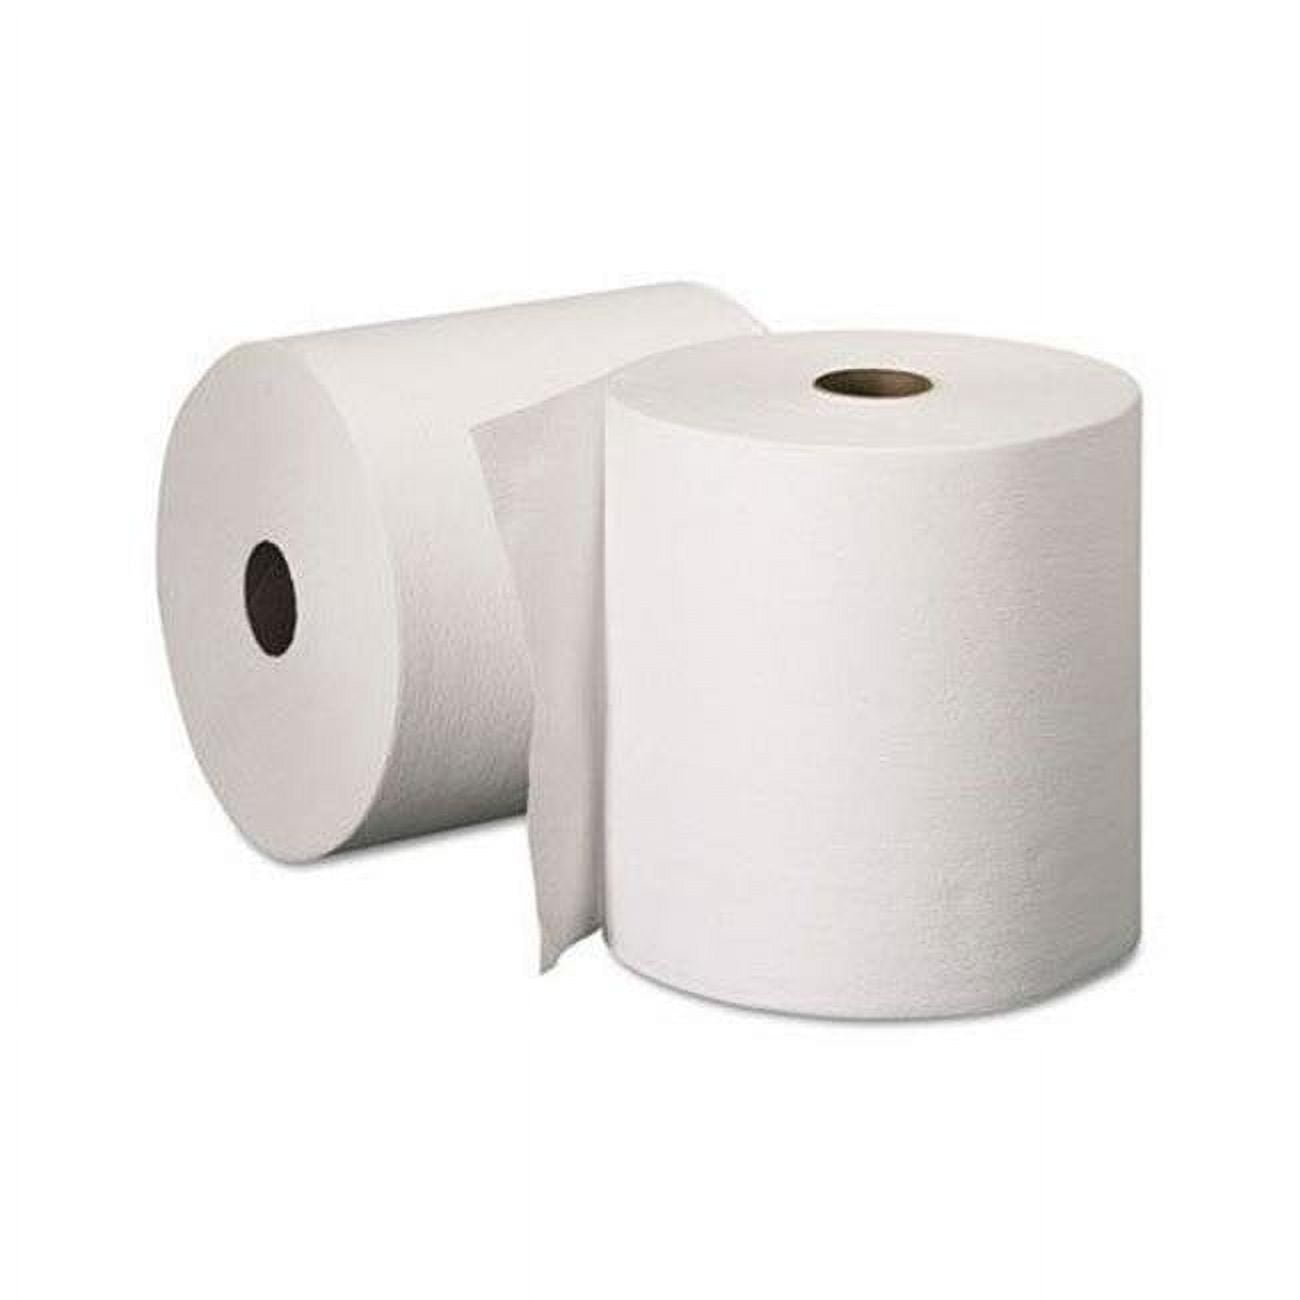 50606 Cpc 8 In. X 600 Ft. 1-ply Kleenex Hard Roll Towel, White - Case Of 6